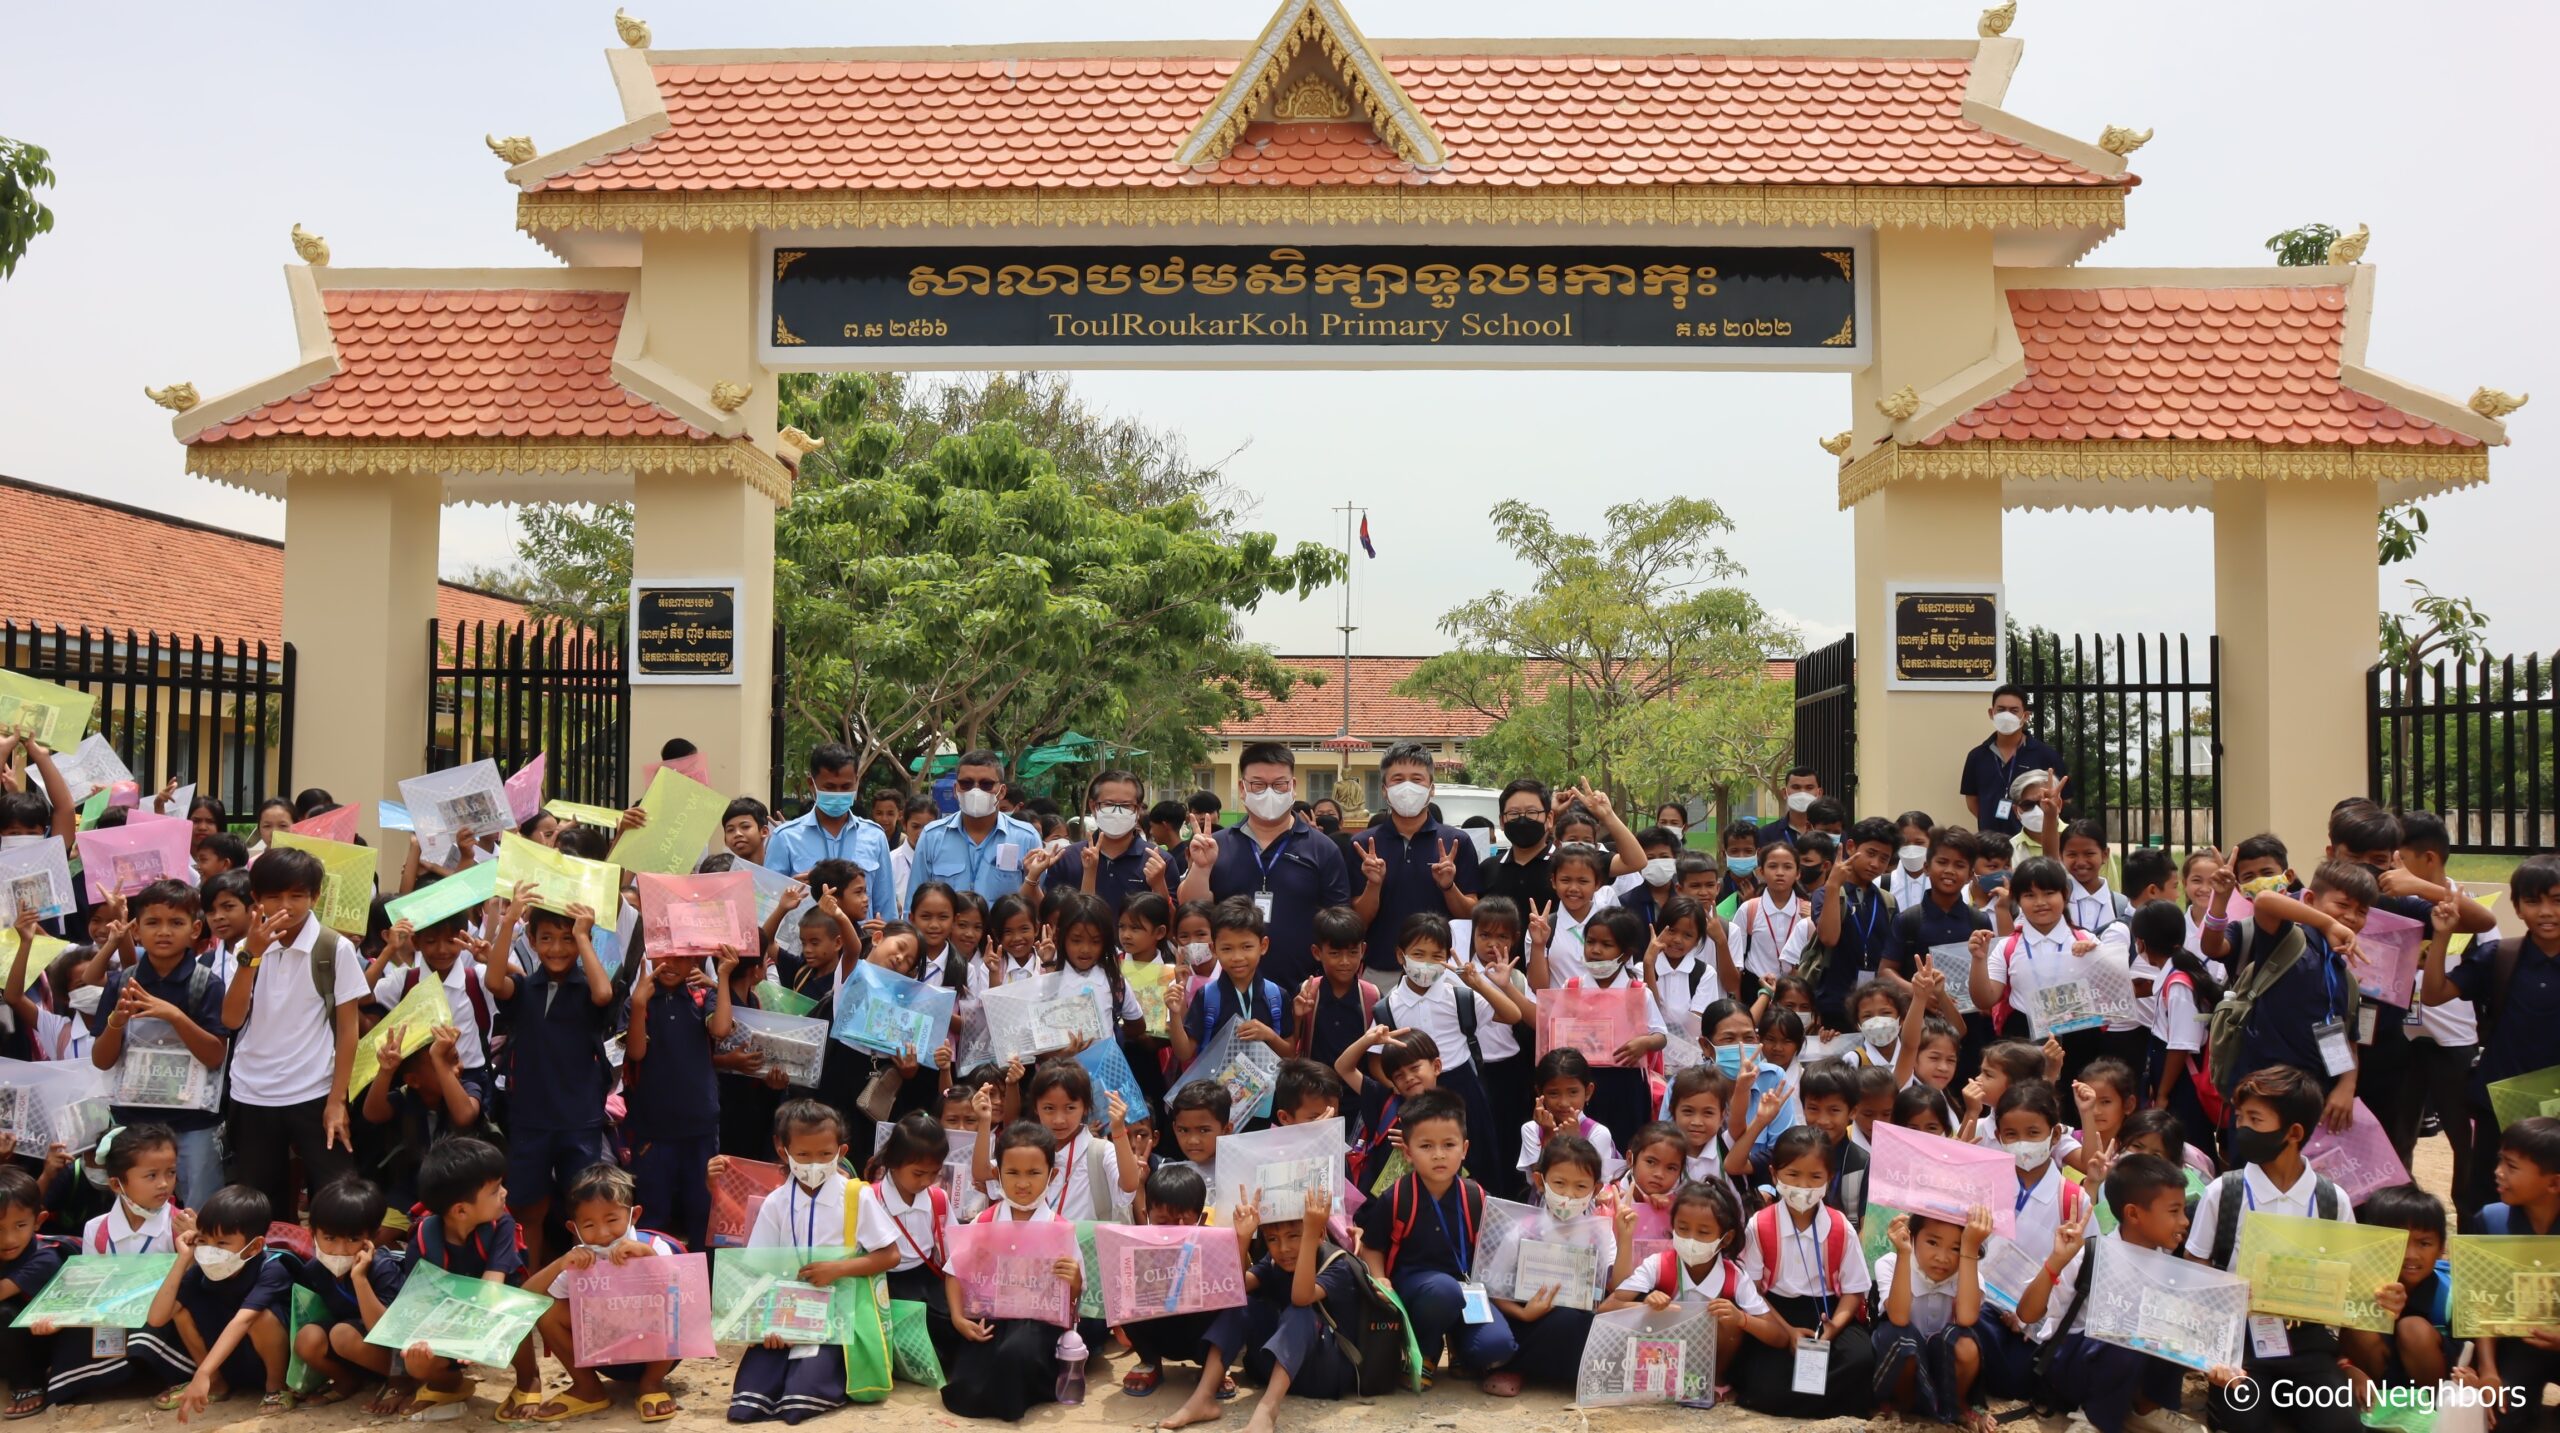 Good Neighbors Cambodia – Cam Capital Plc Supported Tuol Rokakos Primary School with School Supplies and T-Shirts